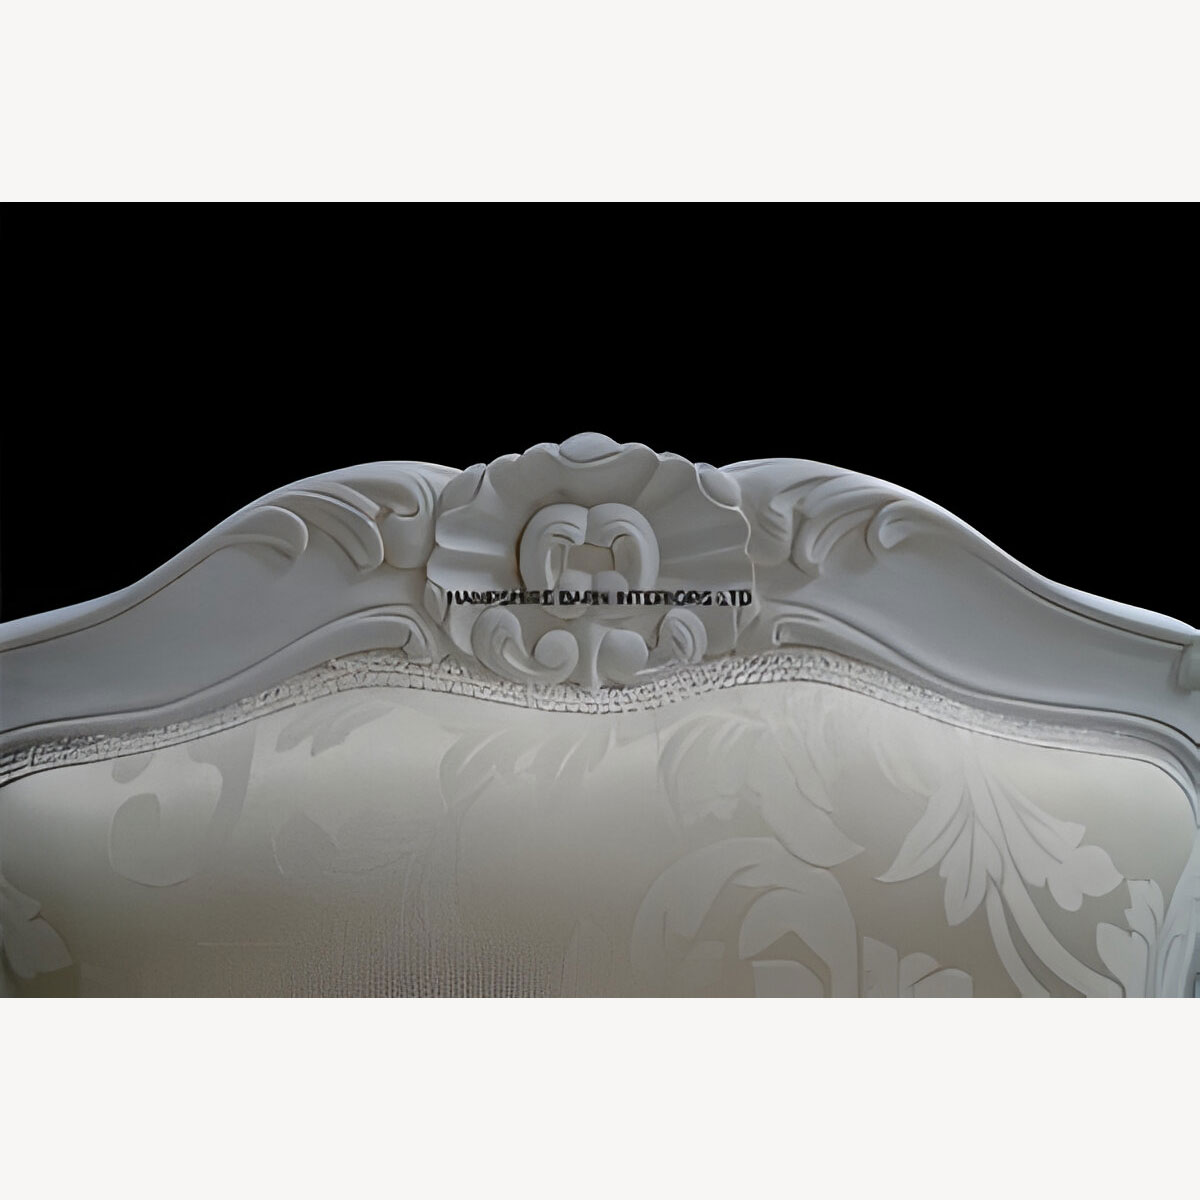 French Chateau Style Ornate Arm Chair Bedroom Antique White Boudoir Shop Lounge 3 - Hampshire Barn Interiors - French Chateau Style Ornate Arm Chair Bedroom Antique White Boudoir Shop Lounge -